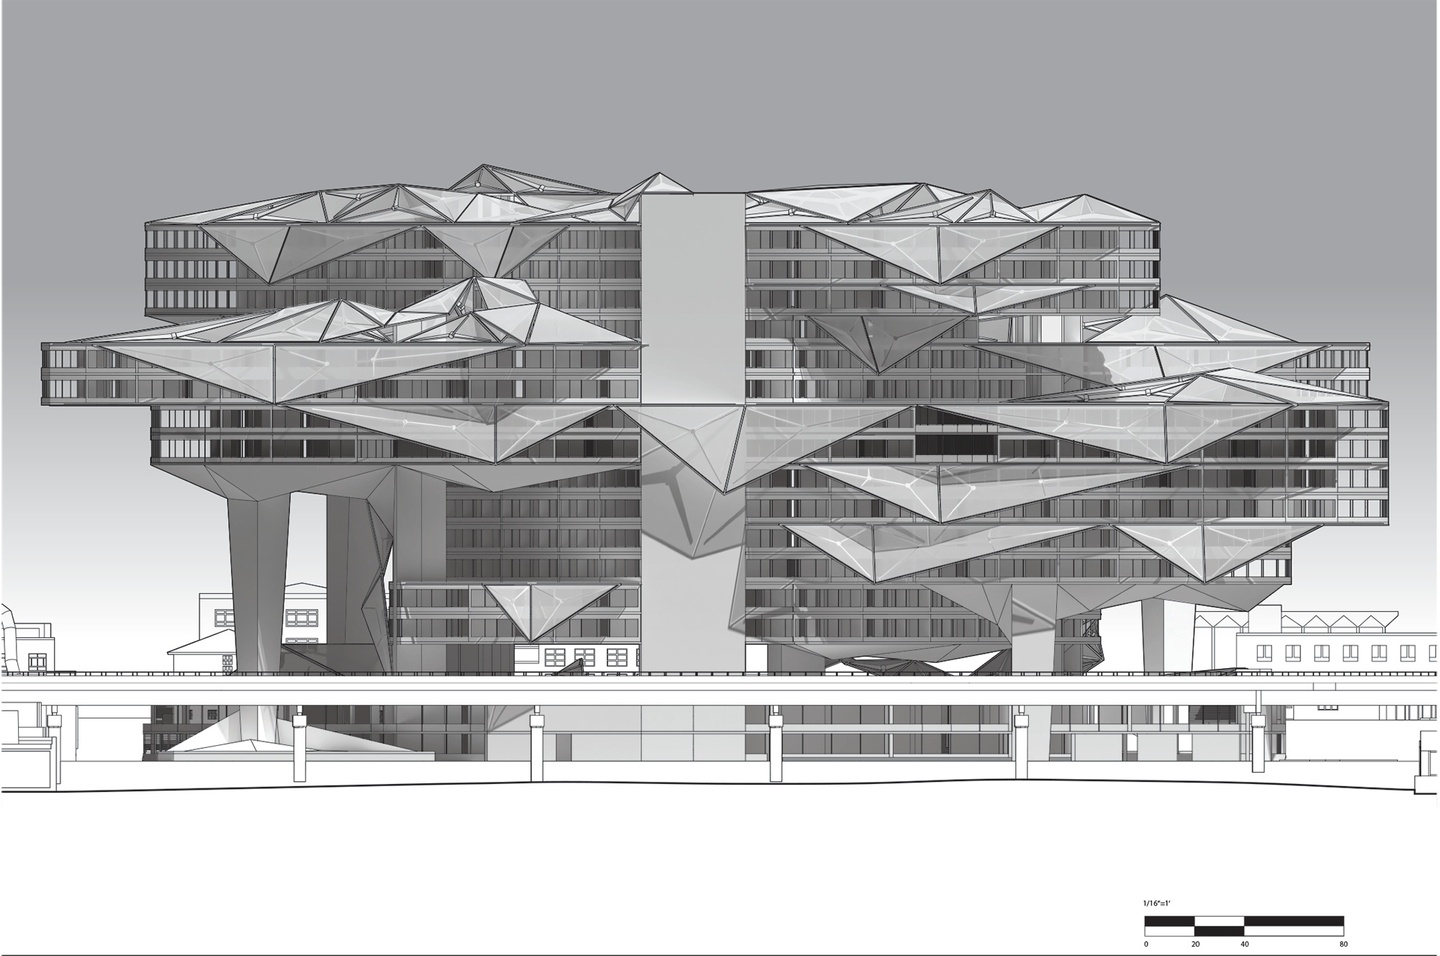 Computer rendering of black and white elevation of a large building with cantilevered faceting forms on various levels.